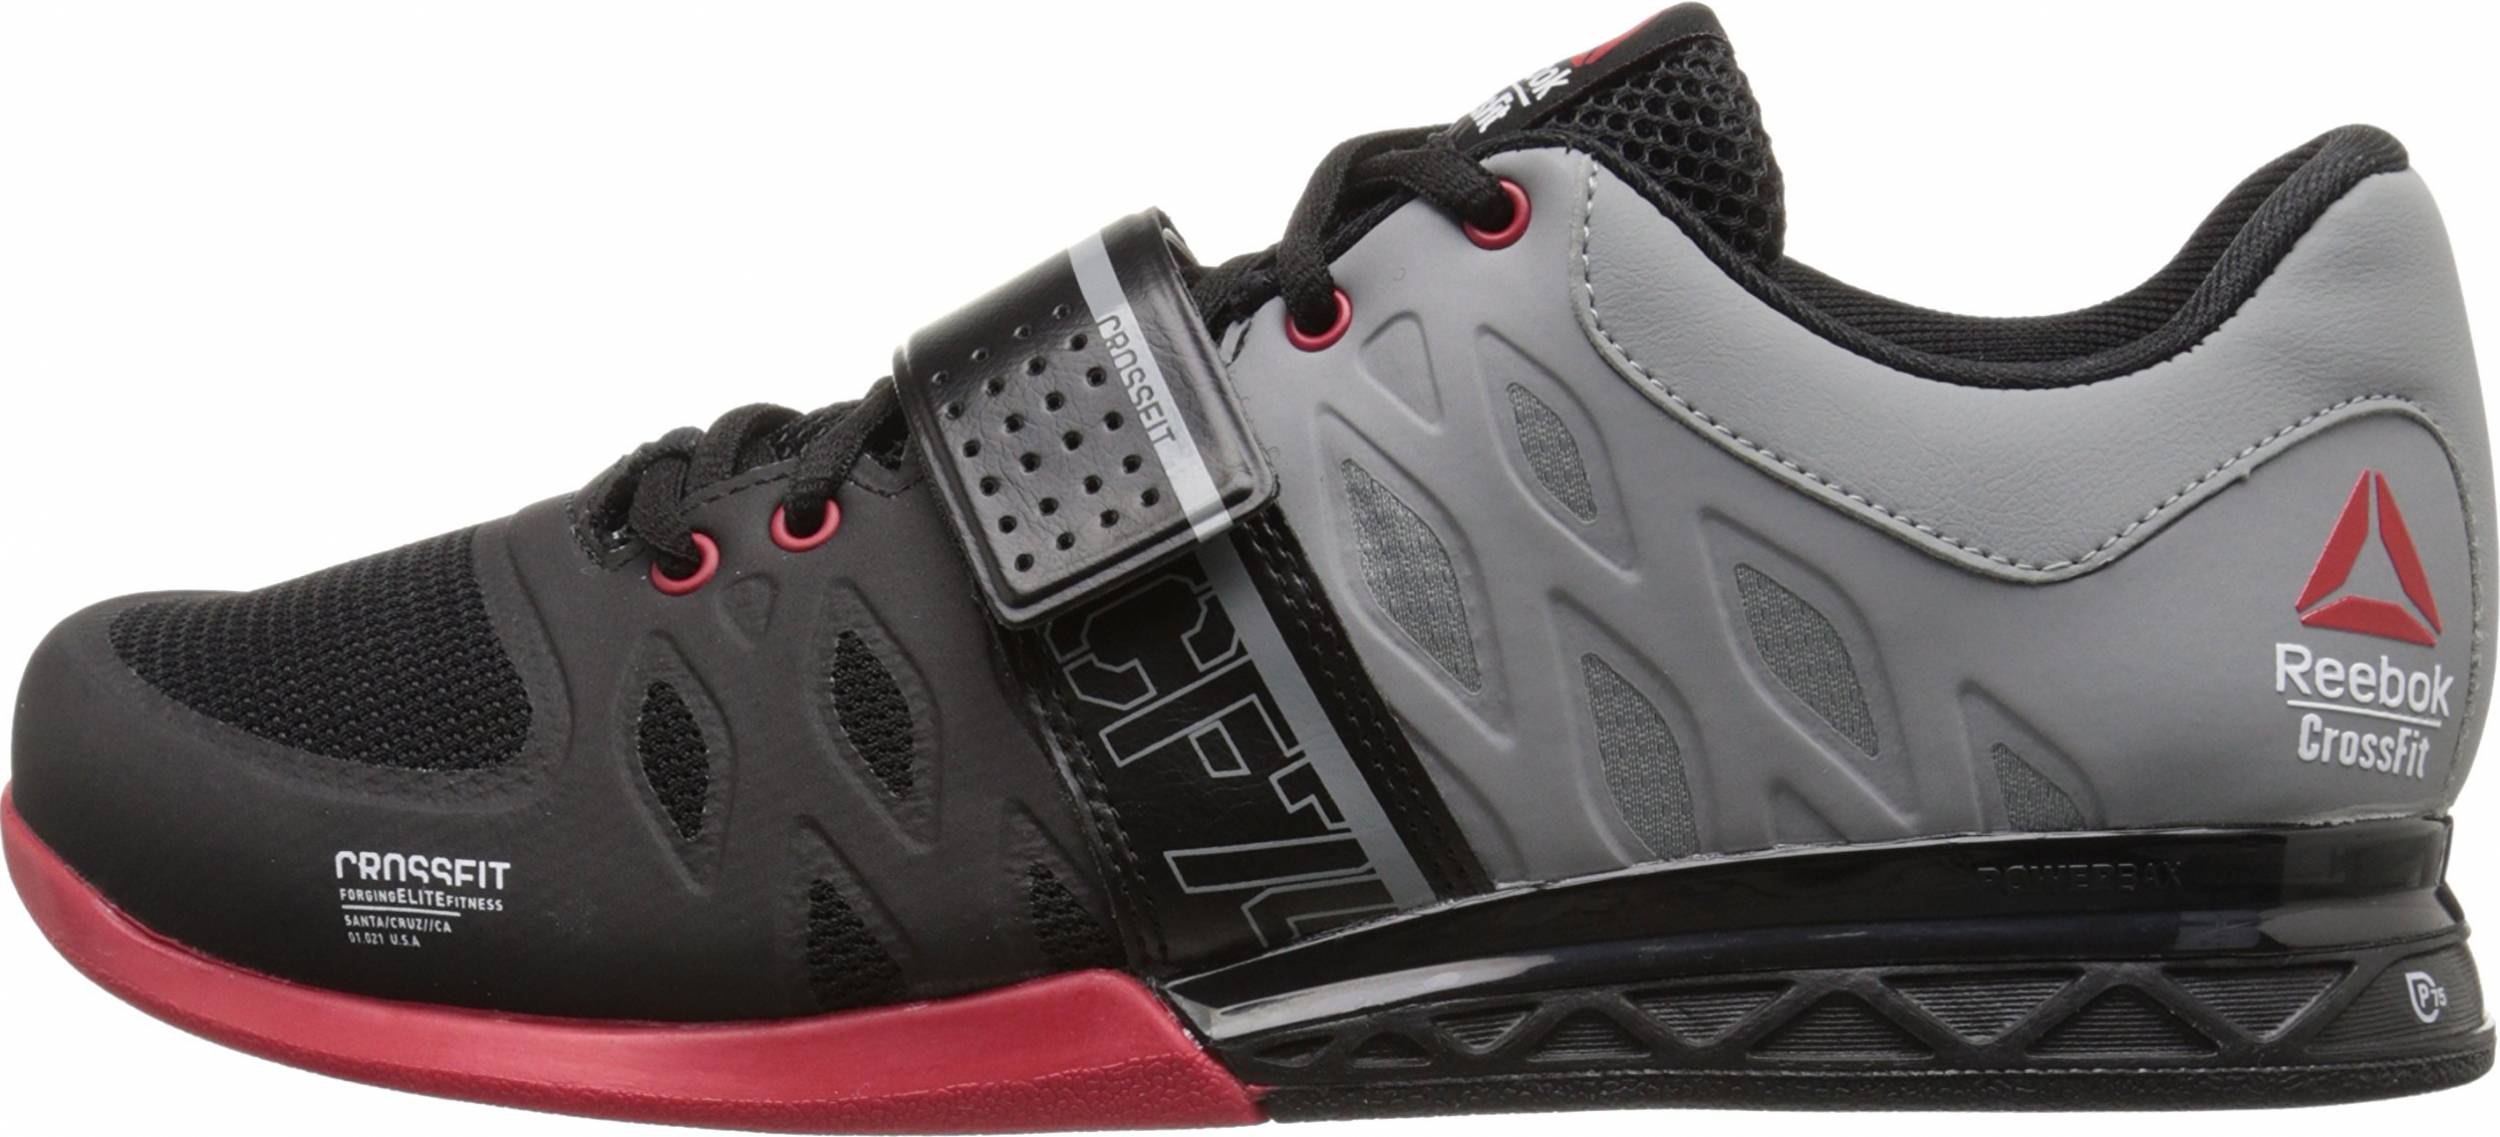 Save 39% on Reebok Weightlifting Shoes 